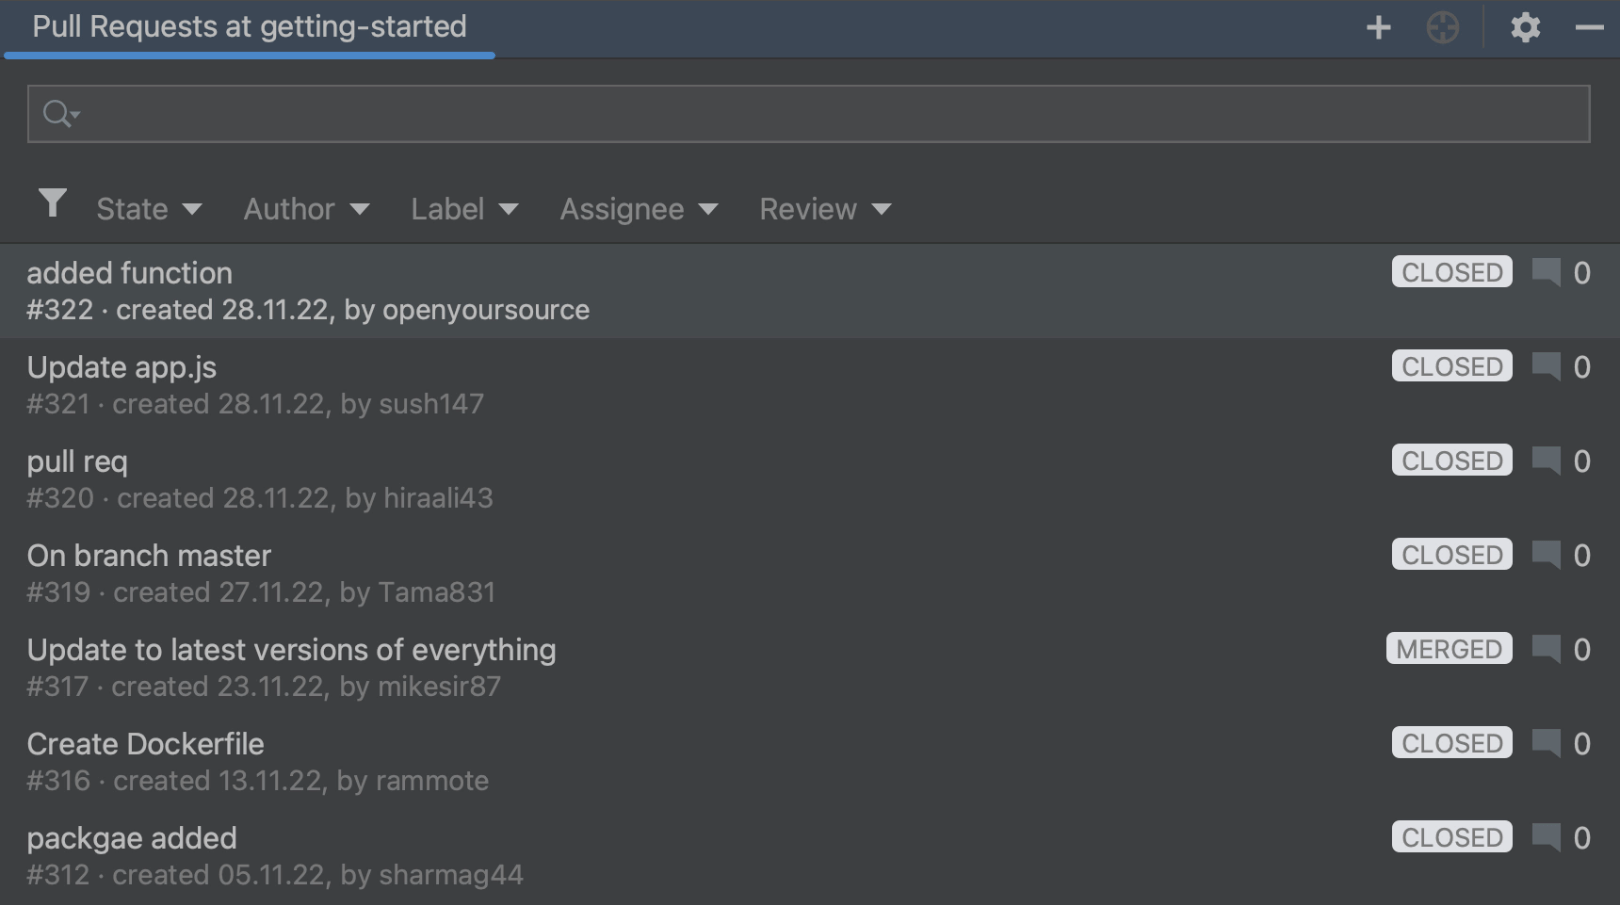 https://www.jetbrains.com/pycharm/whatsnew/img/2022.3/04_UX_Redesigned_Review_list.png